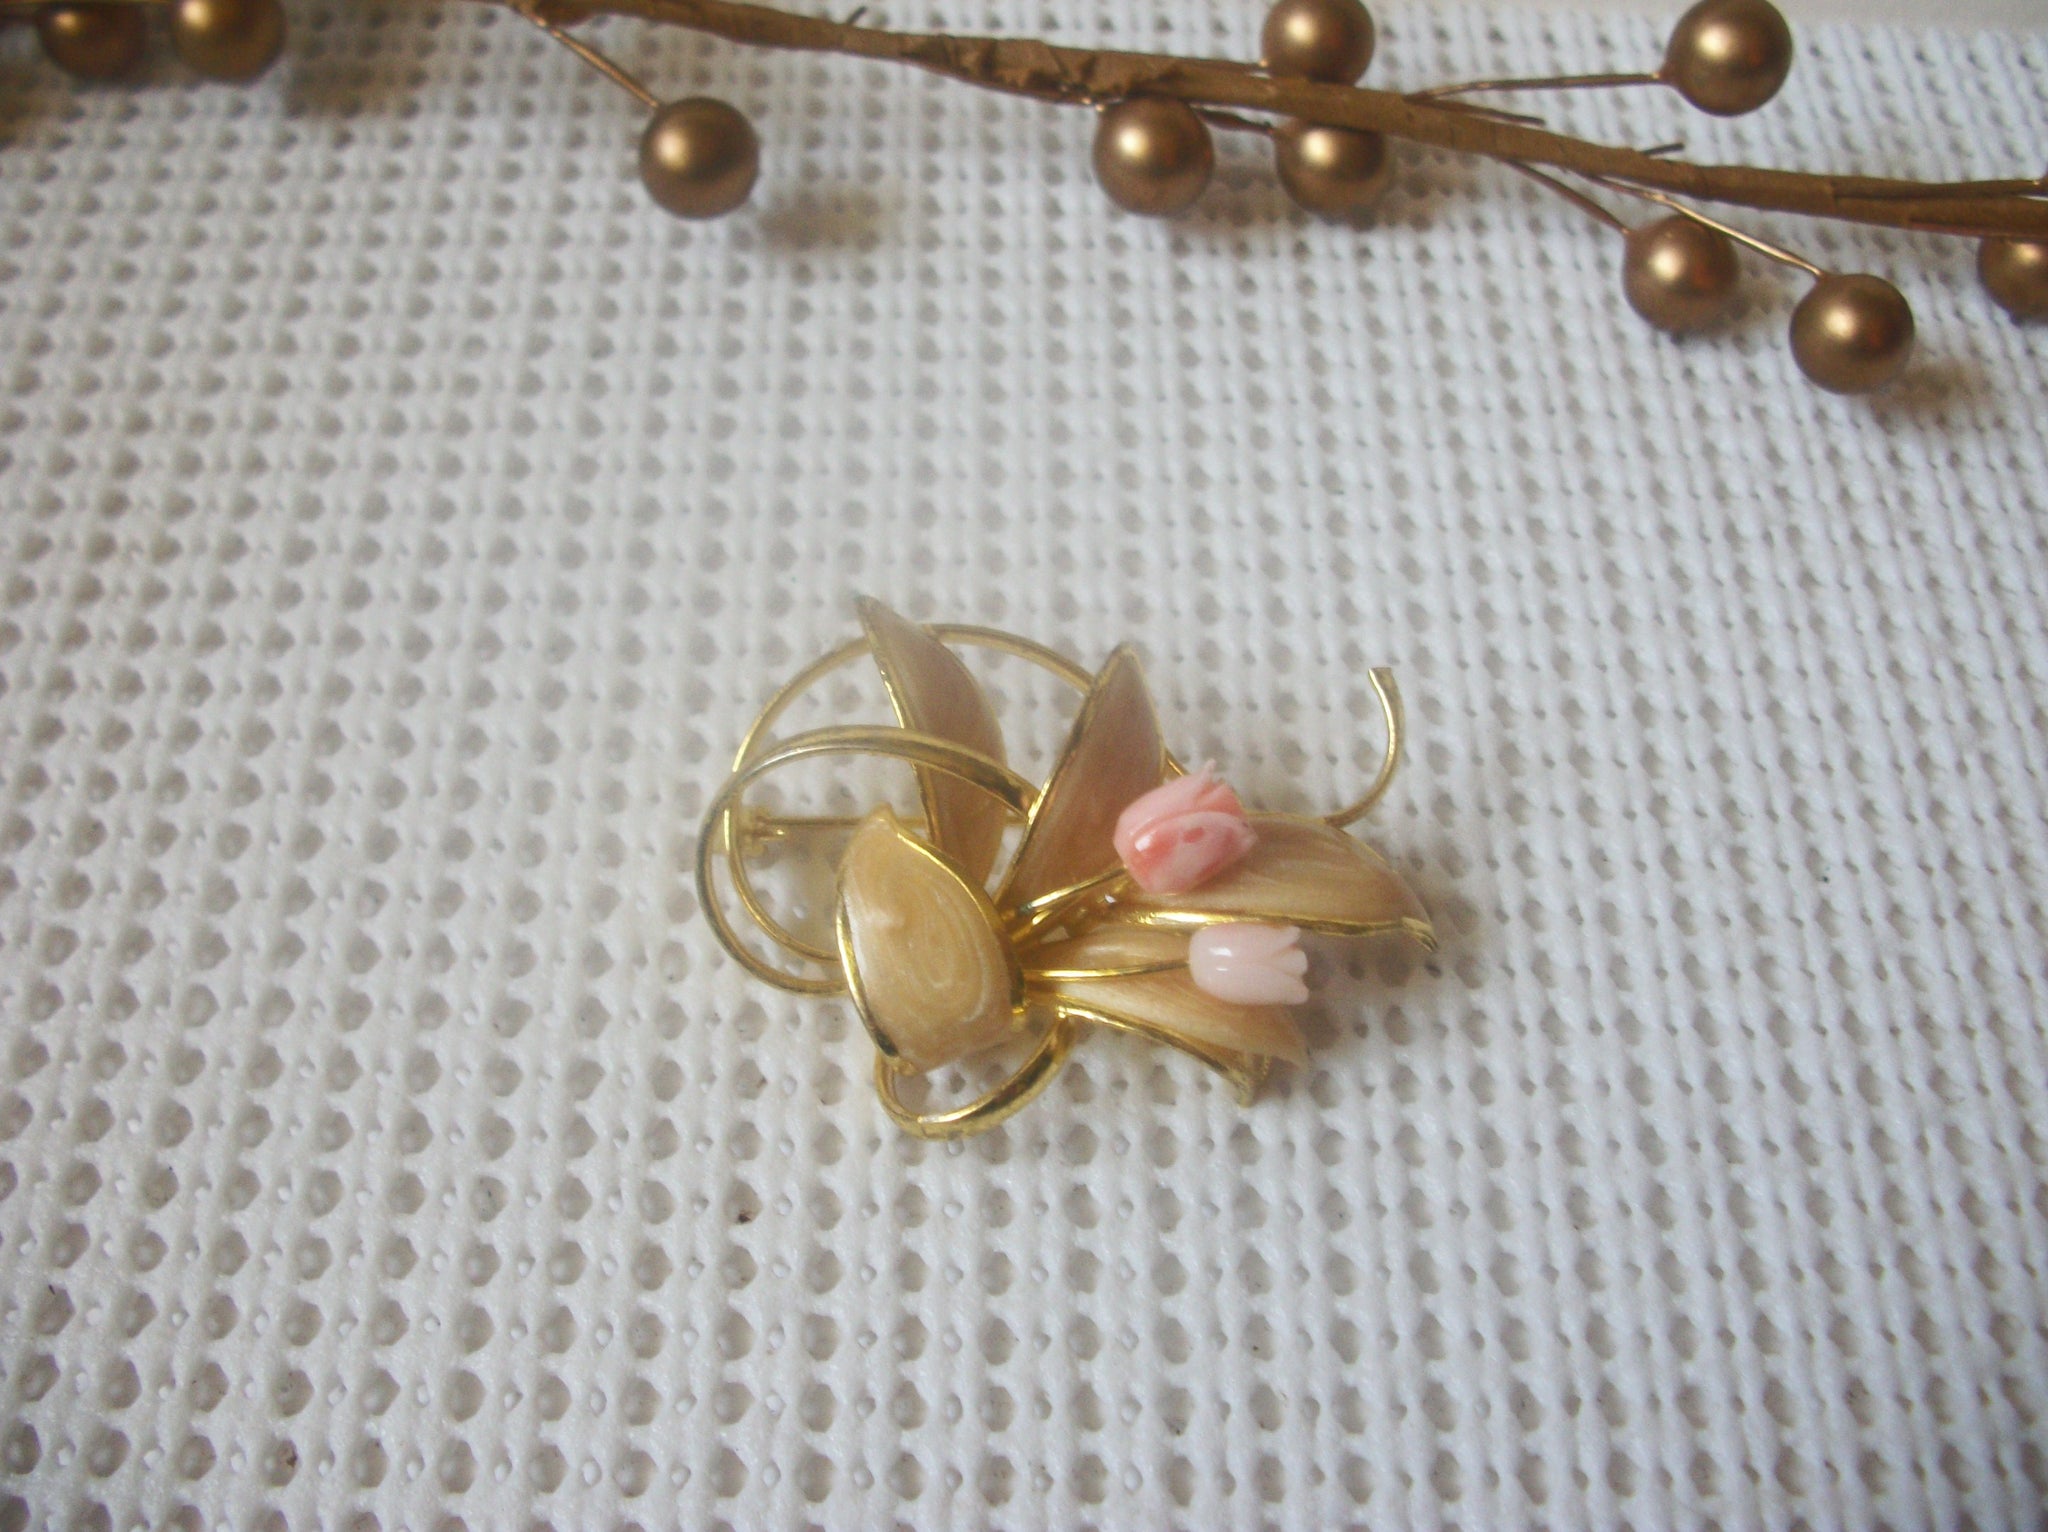 Vintage Jewelry, Enameled Pale Pink Tulips Leaves Intertwining Gold Tone Brooch Pin 52017